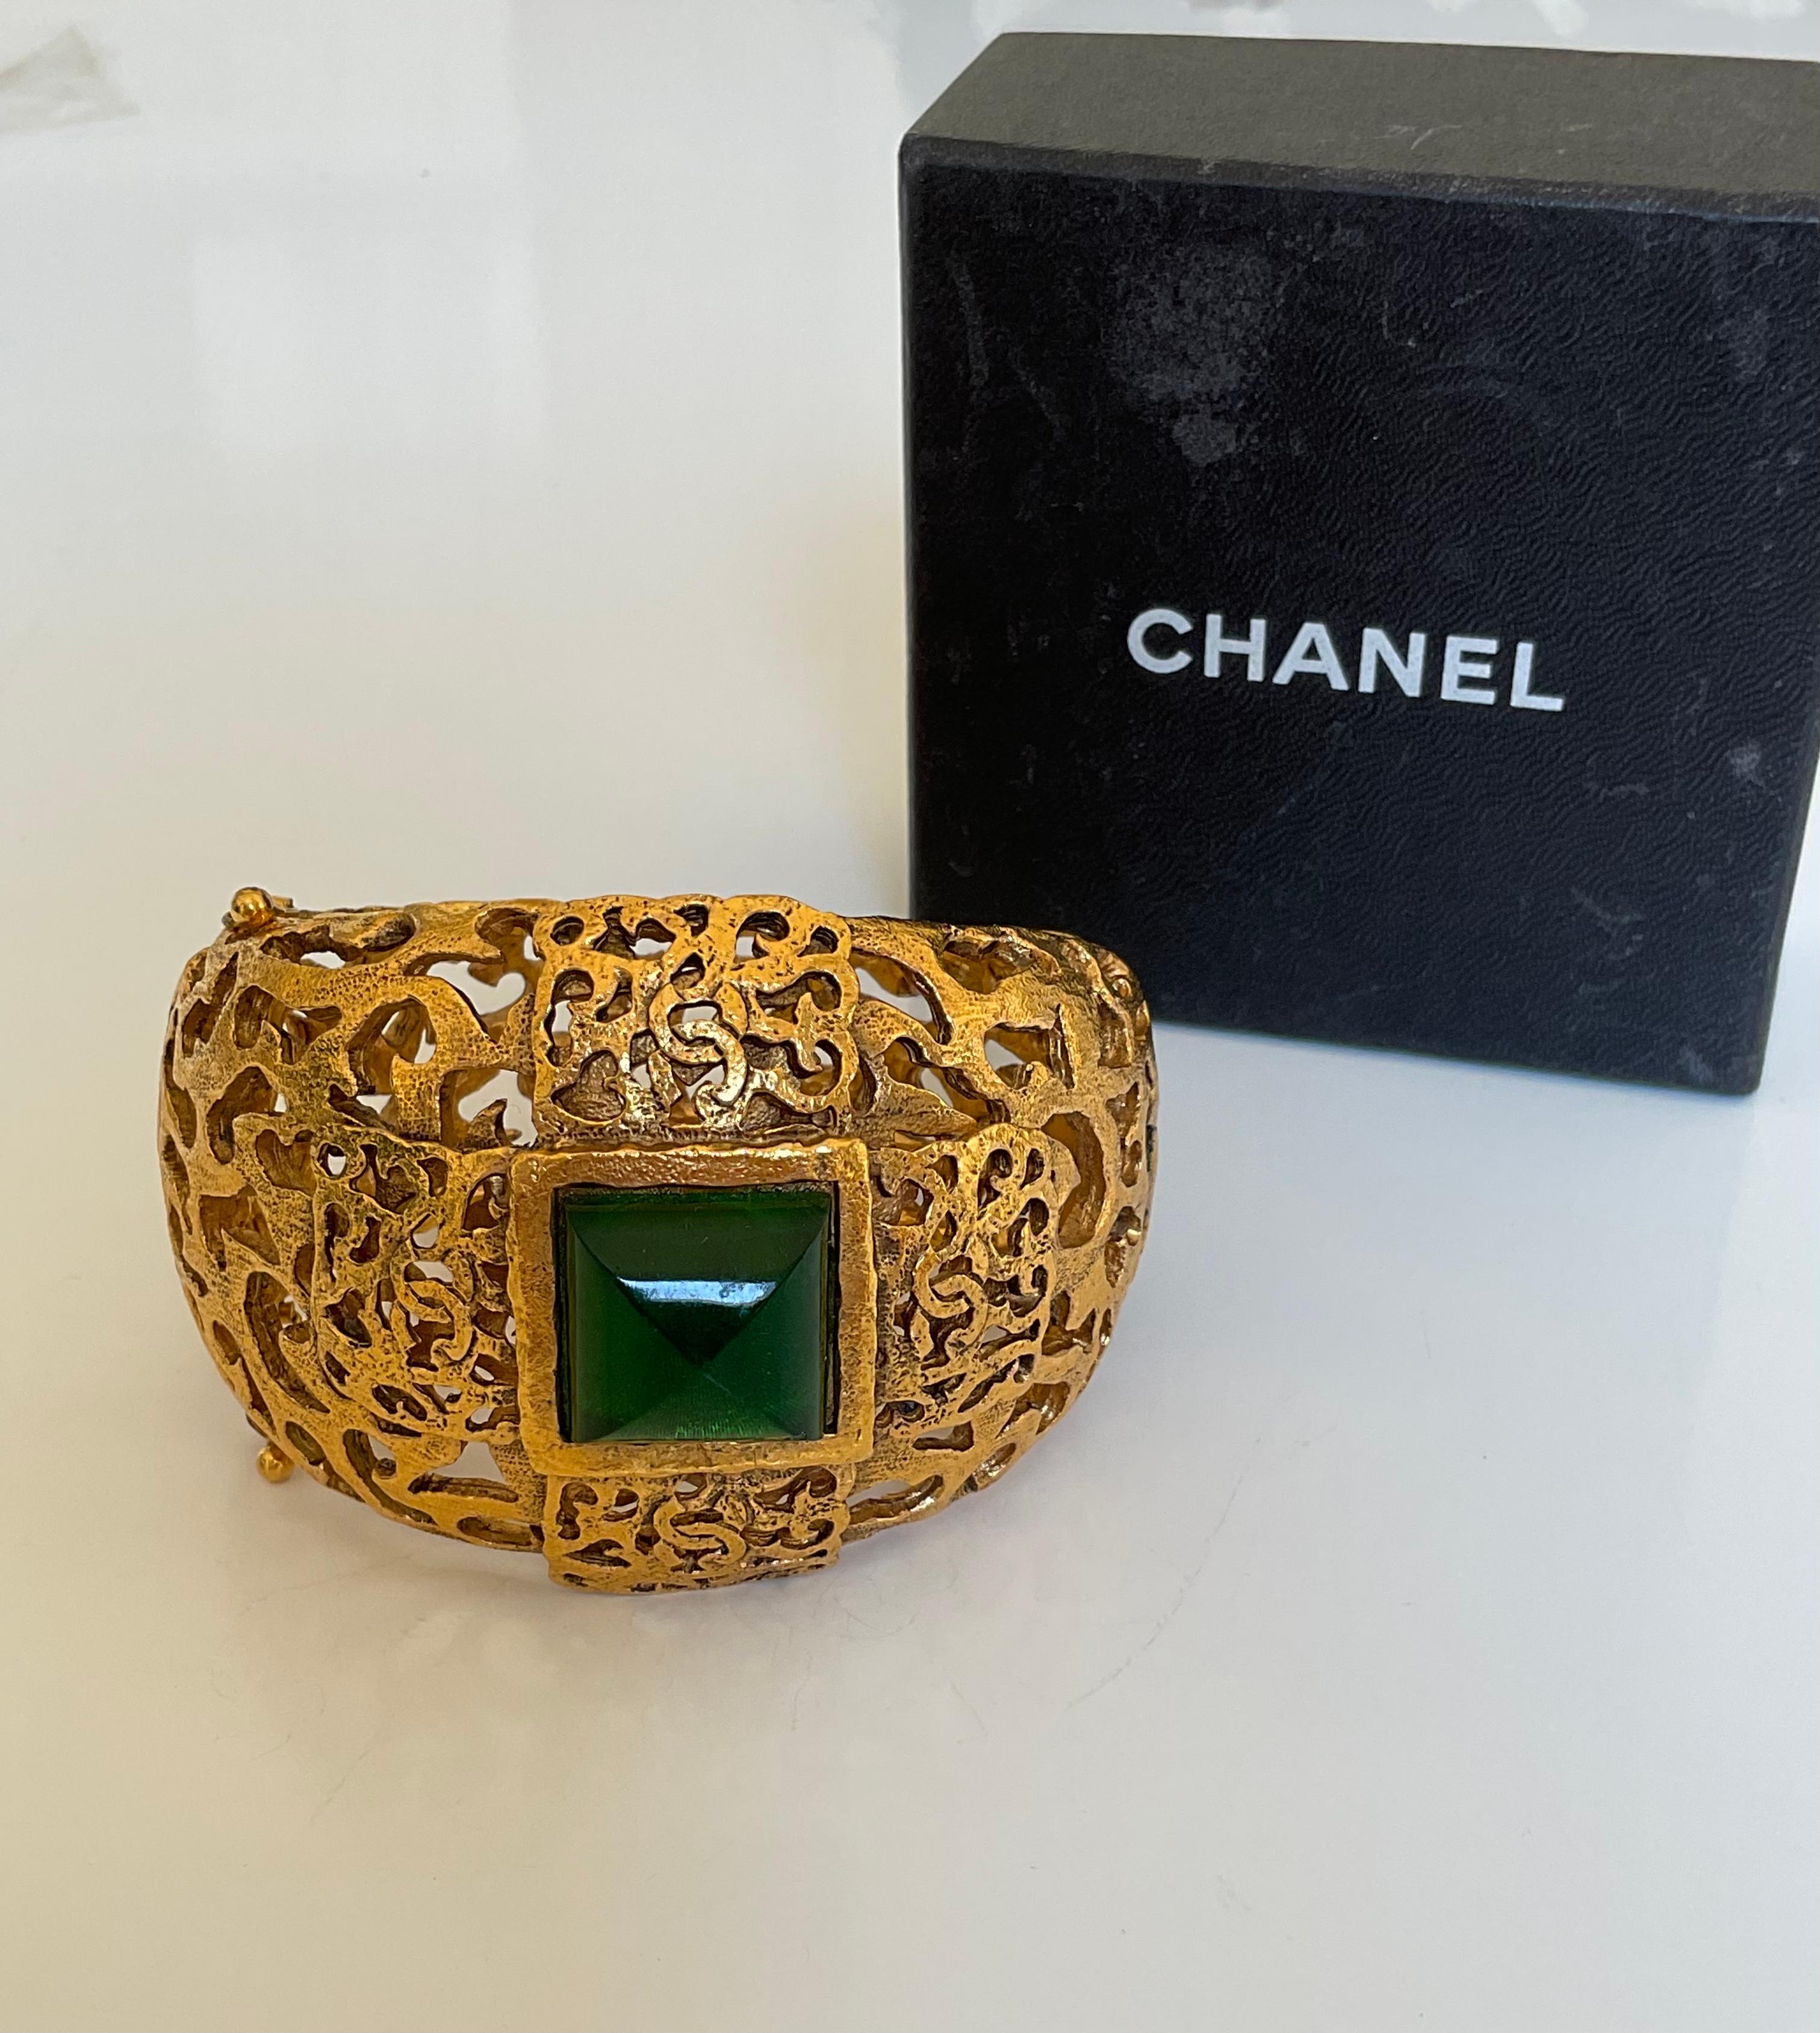 This one of a kind bracelet from the 80’s present a large central green stone in “pate de verre”. This impressive clamper bracelet has four interlocking CC, which is the iconic logo of the House, surrounding the stone at the centre. The Haute